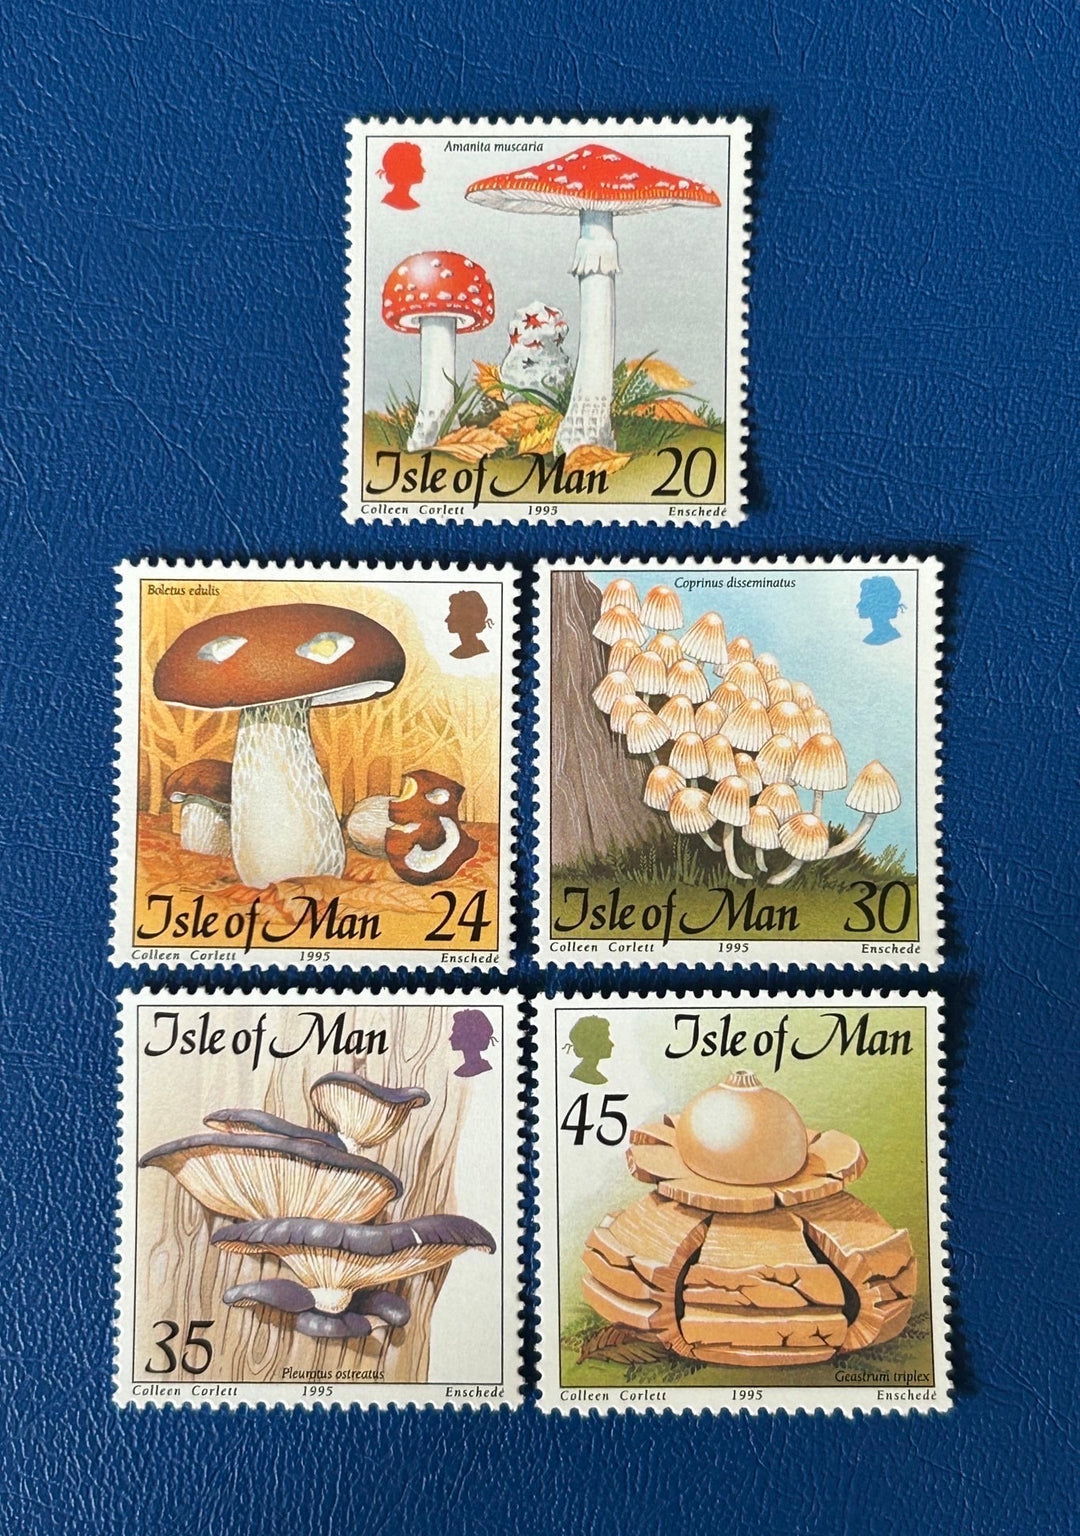 Isle of Man - Original Vintage Postage Stamps - 1995 - Mushrooms - for the collector, artist or crafter